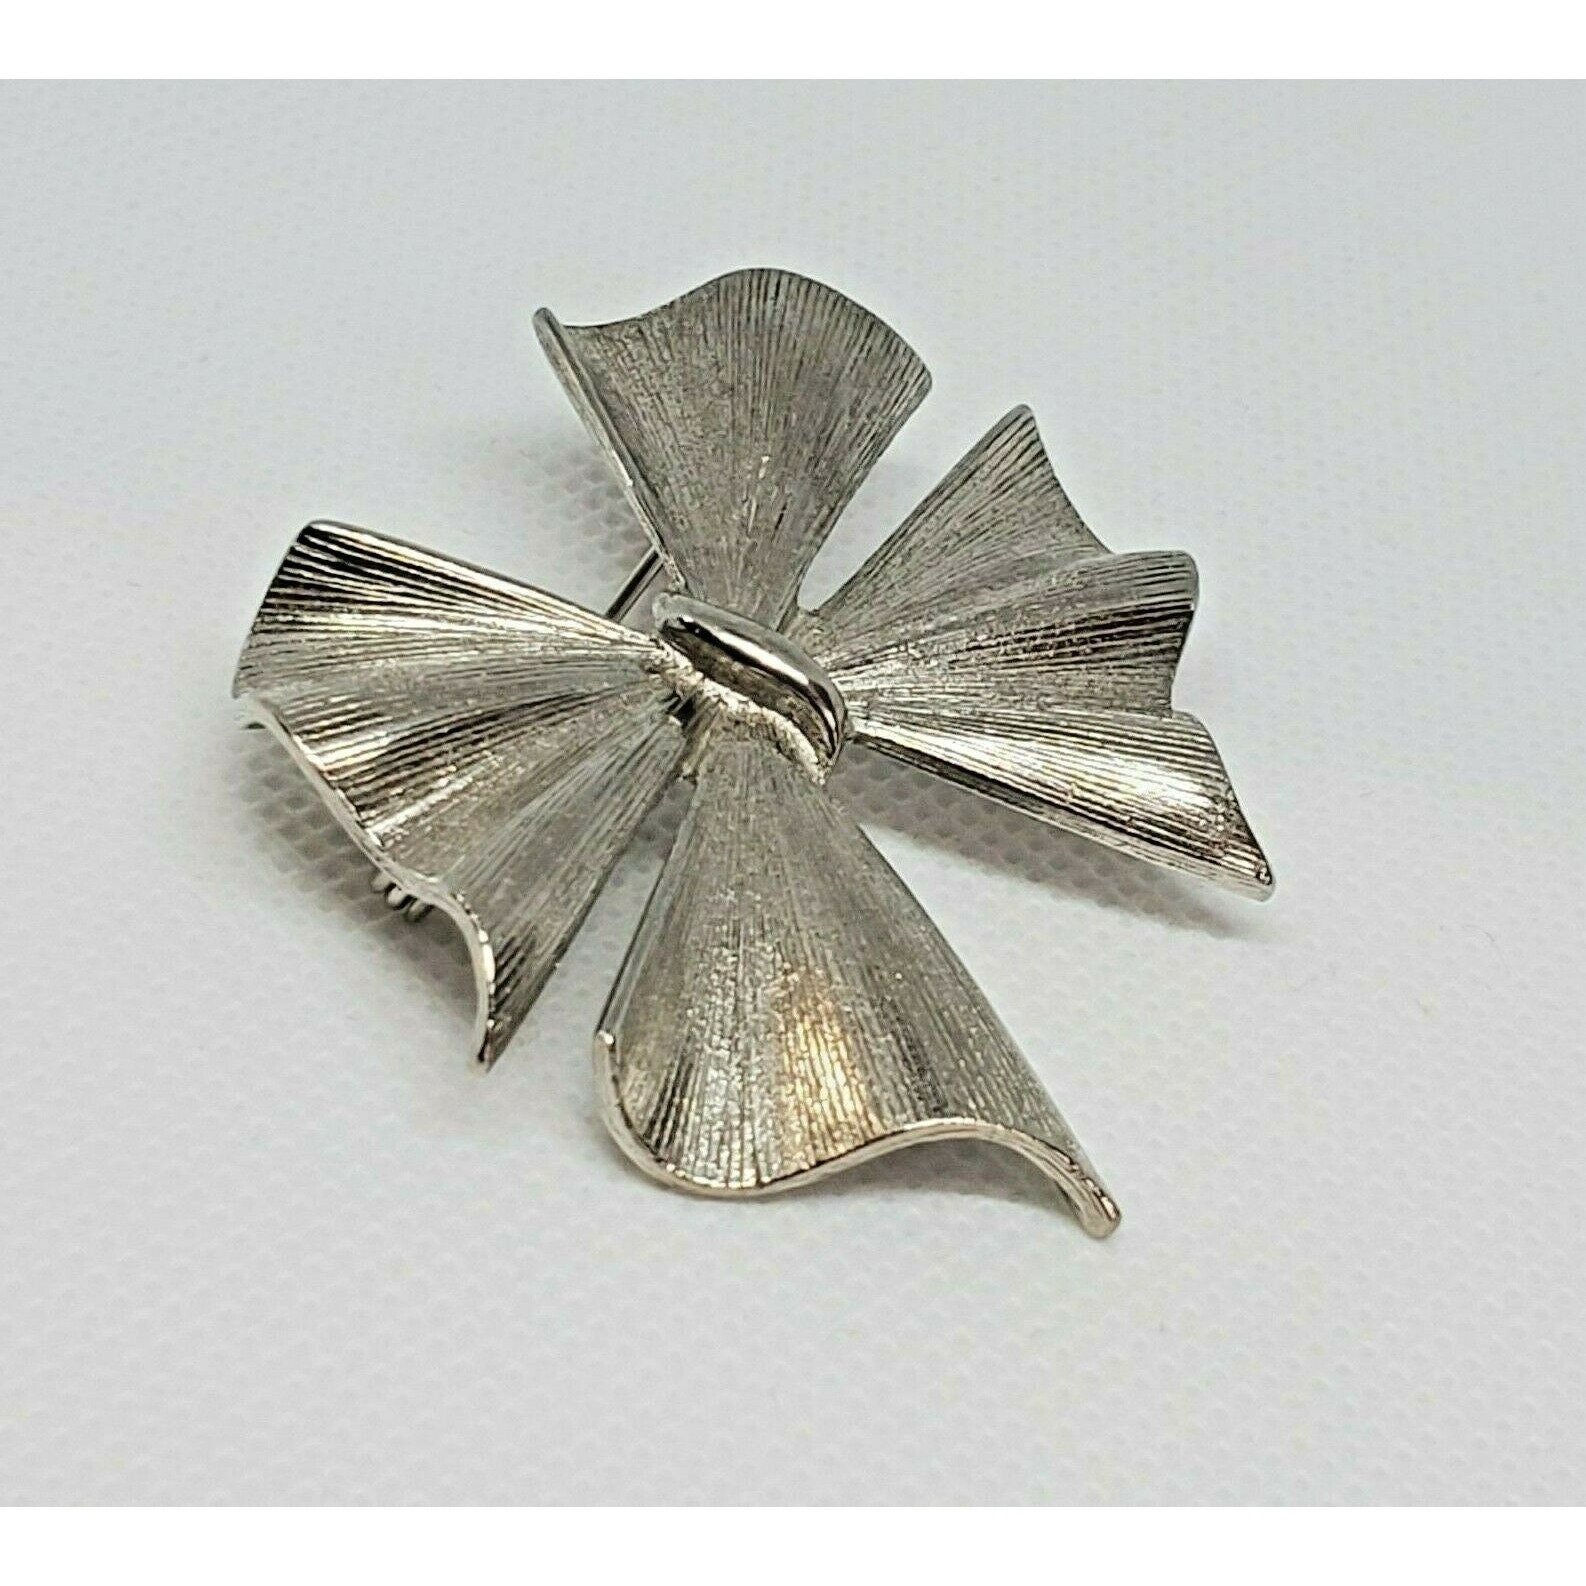 Vintage Textured Metal Ribbon Brooch Pin Silver Toned Metal Retro MCM  Unsigned - $11 - From Kate